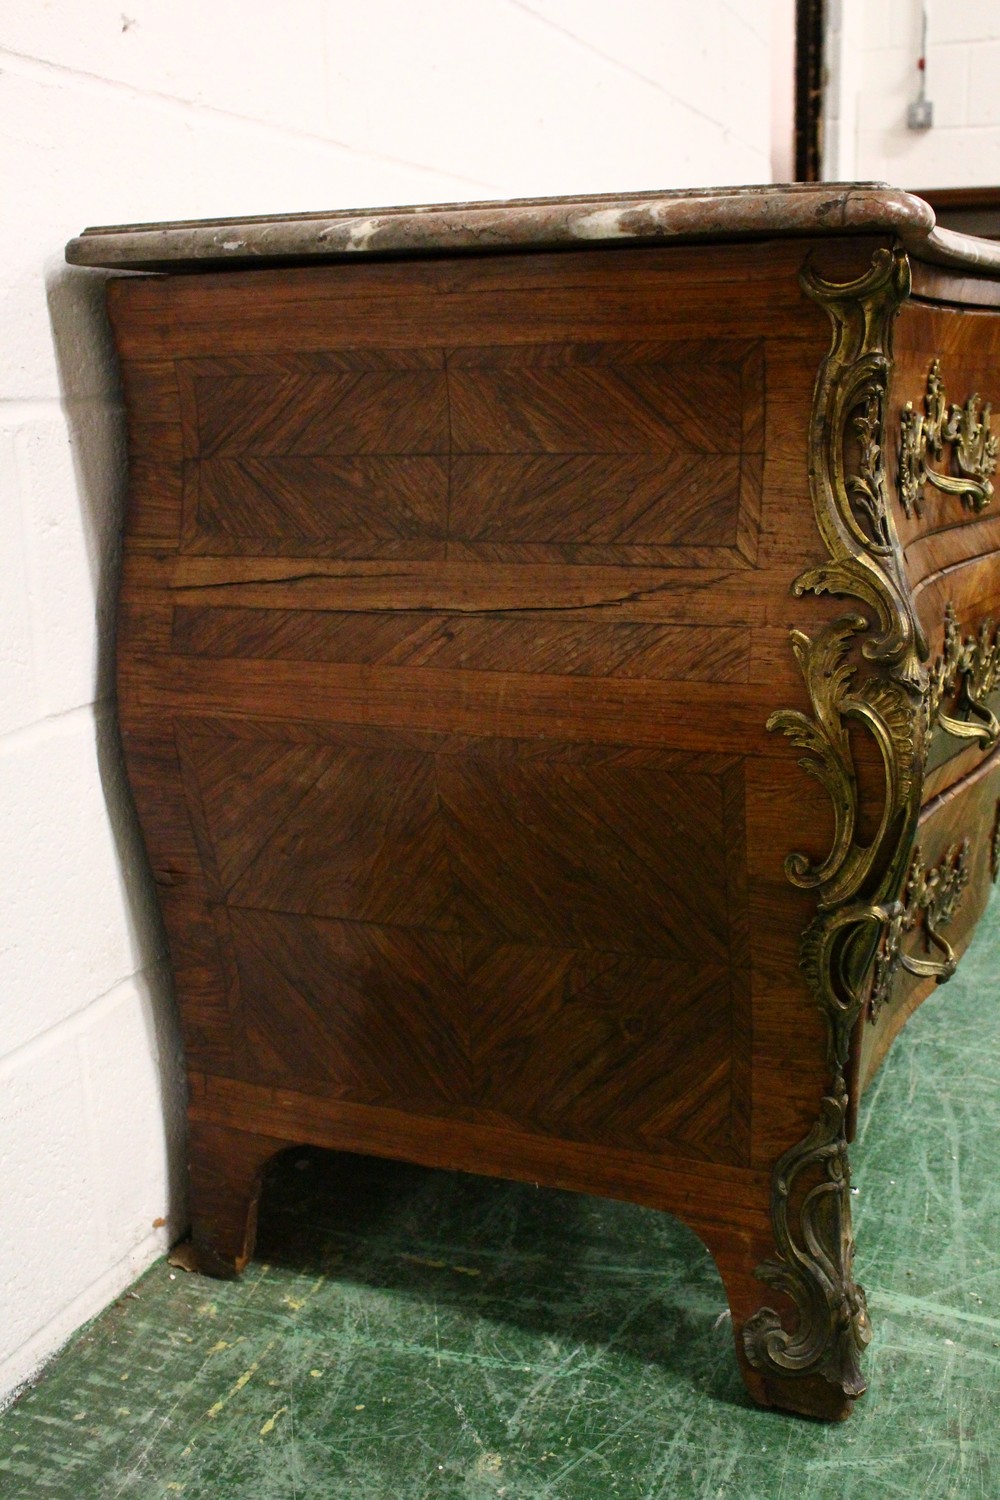 A LOUIS XVTH KINGWOOD BOMBE FRONTED COMMODE by JEAN CHARLES ELLEUME, CIRCA 1755, with grey marble - Image 13 of 37